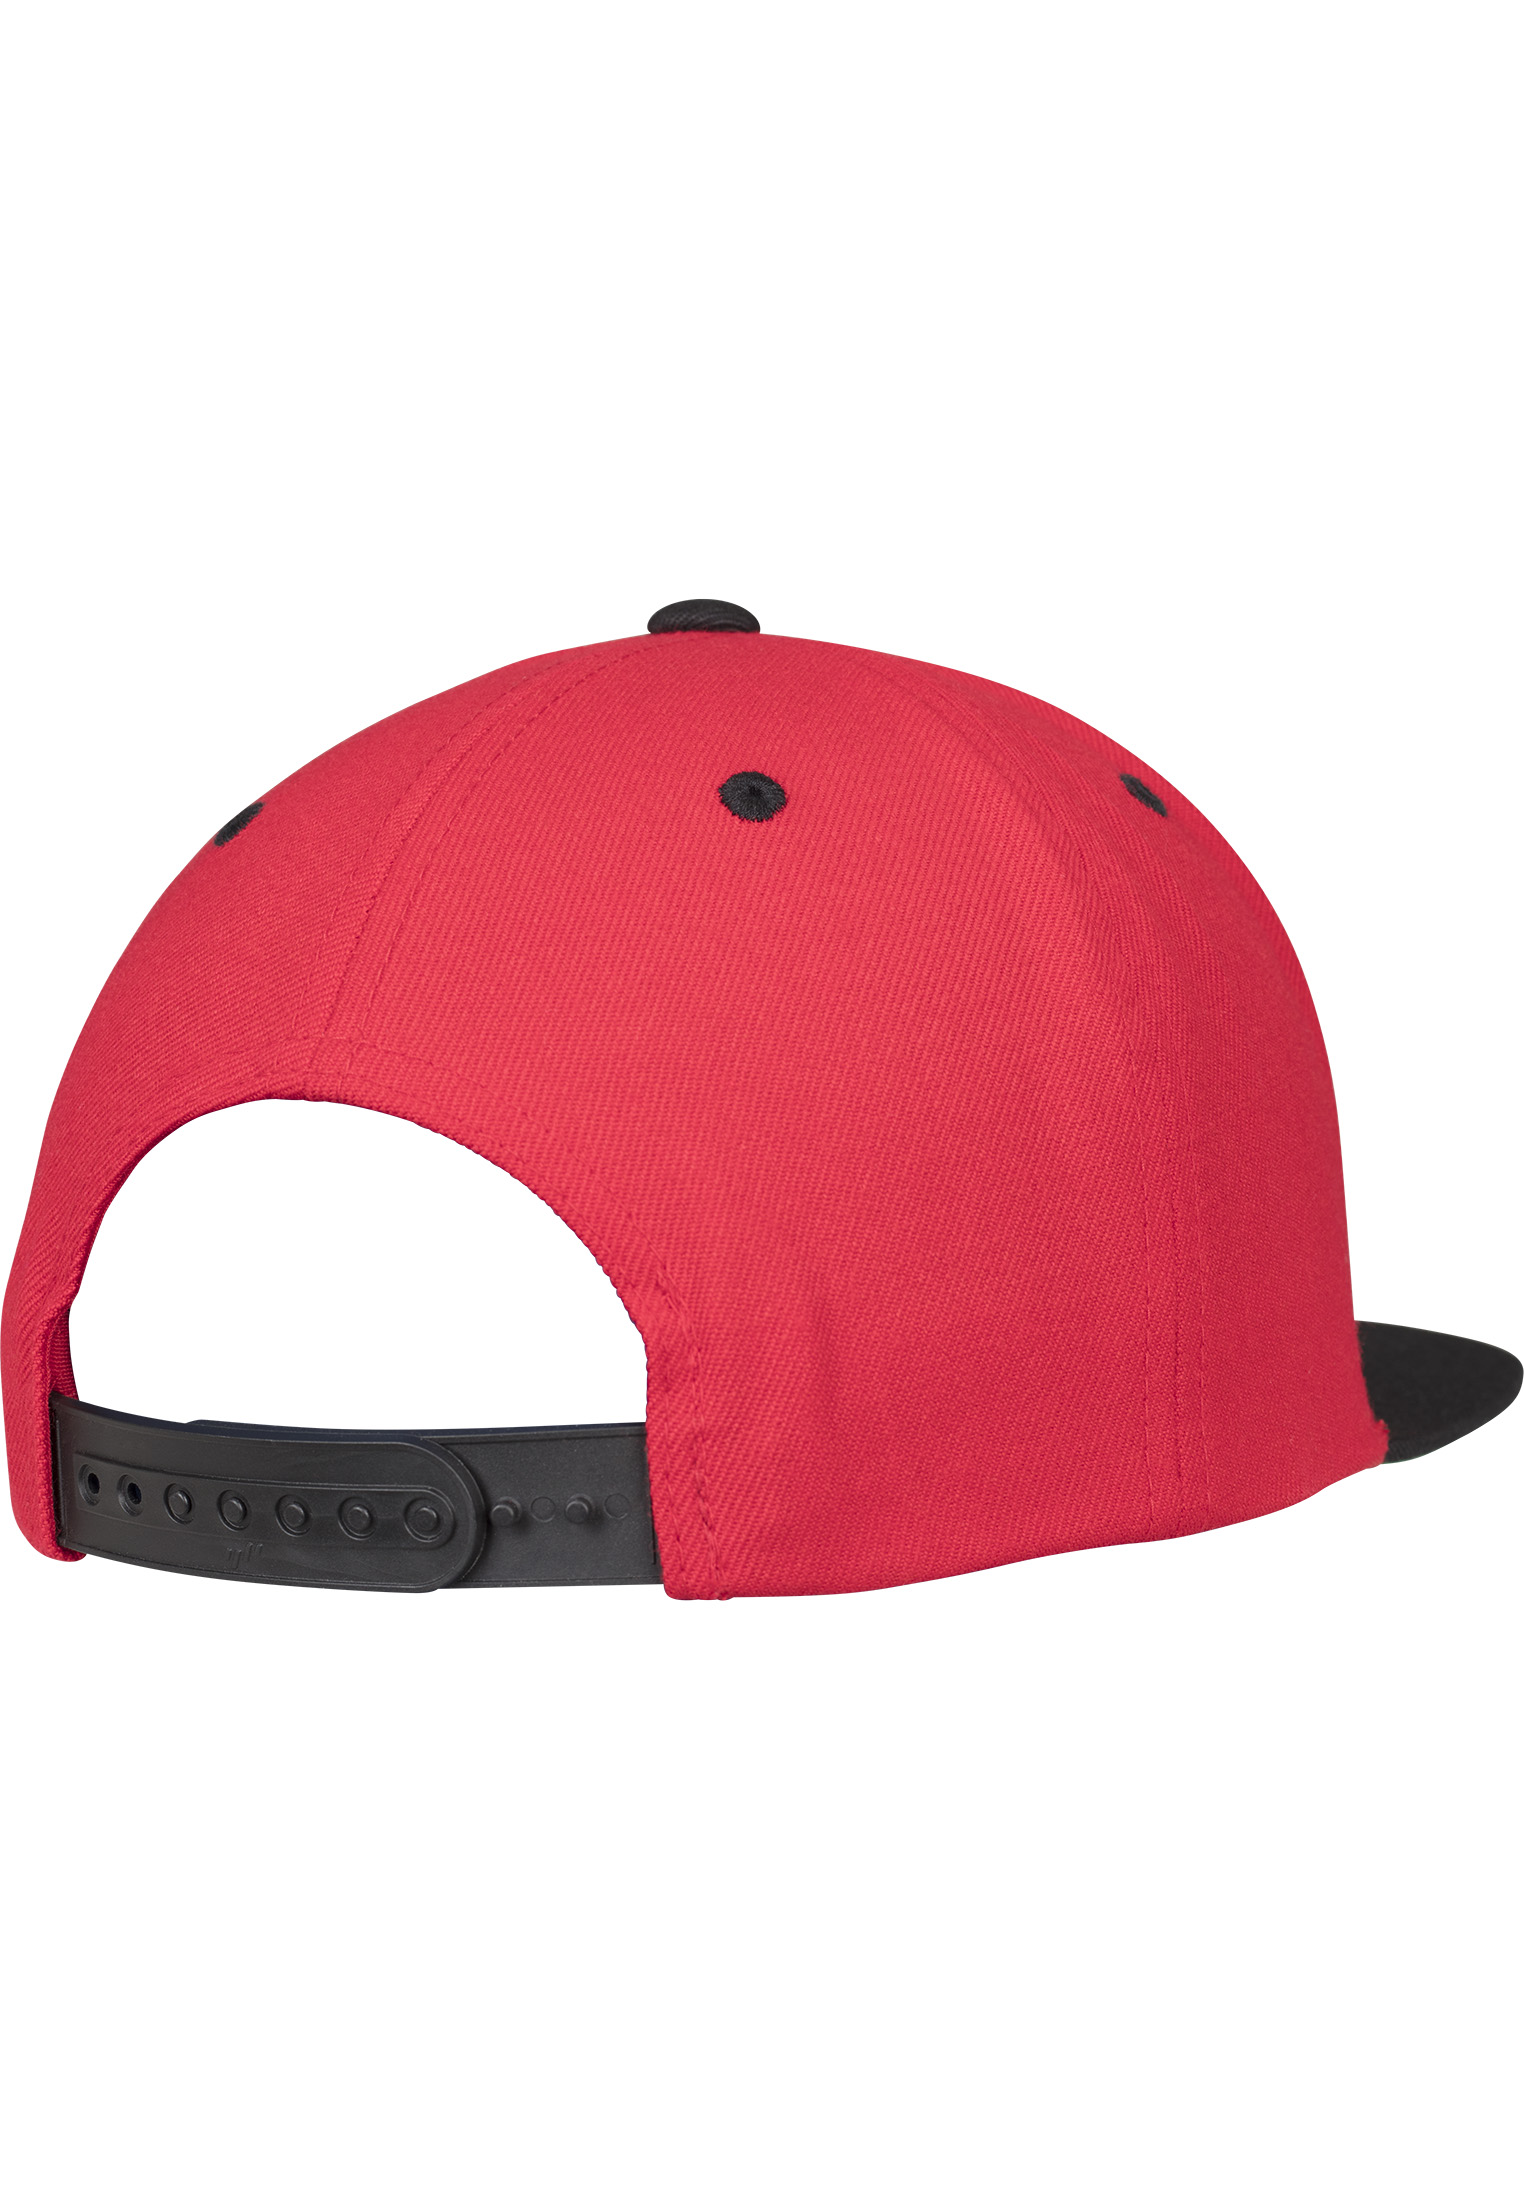 Snapback Classic Snapback 2-Tone in Farbe red/blk